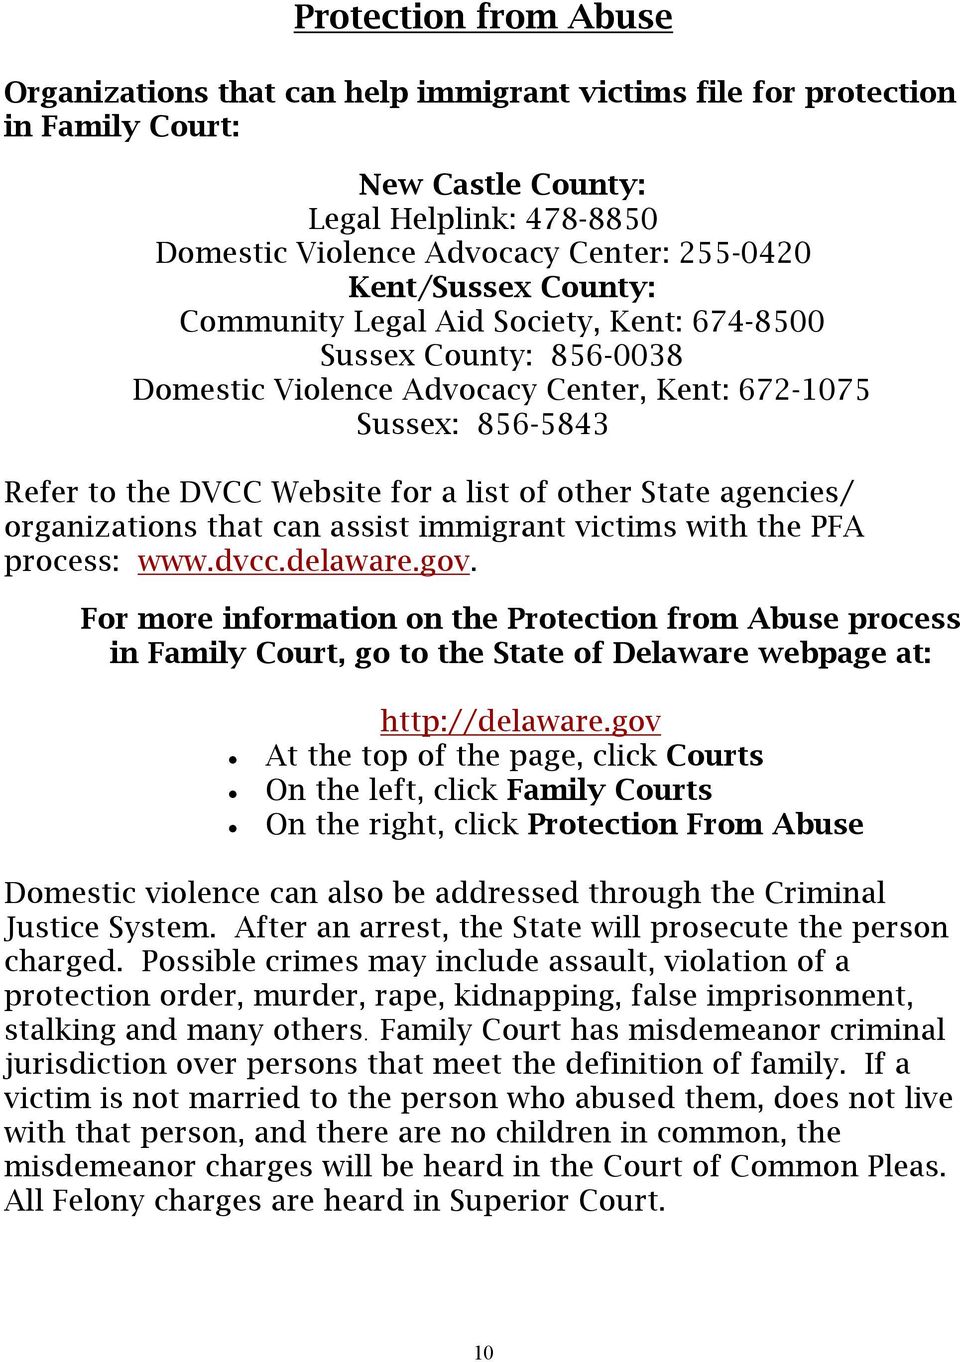 other State agencies/ organizations that can assist immigrant victims with the PFA process: www.dvcc.delaware.gov.